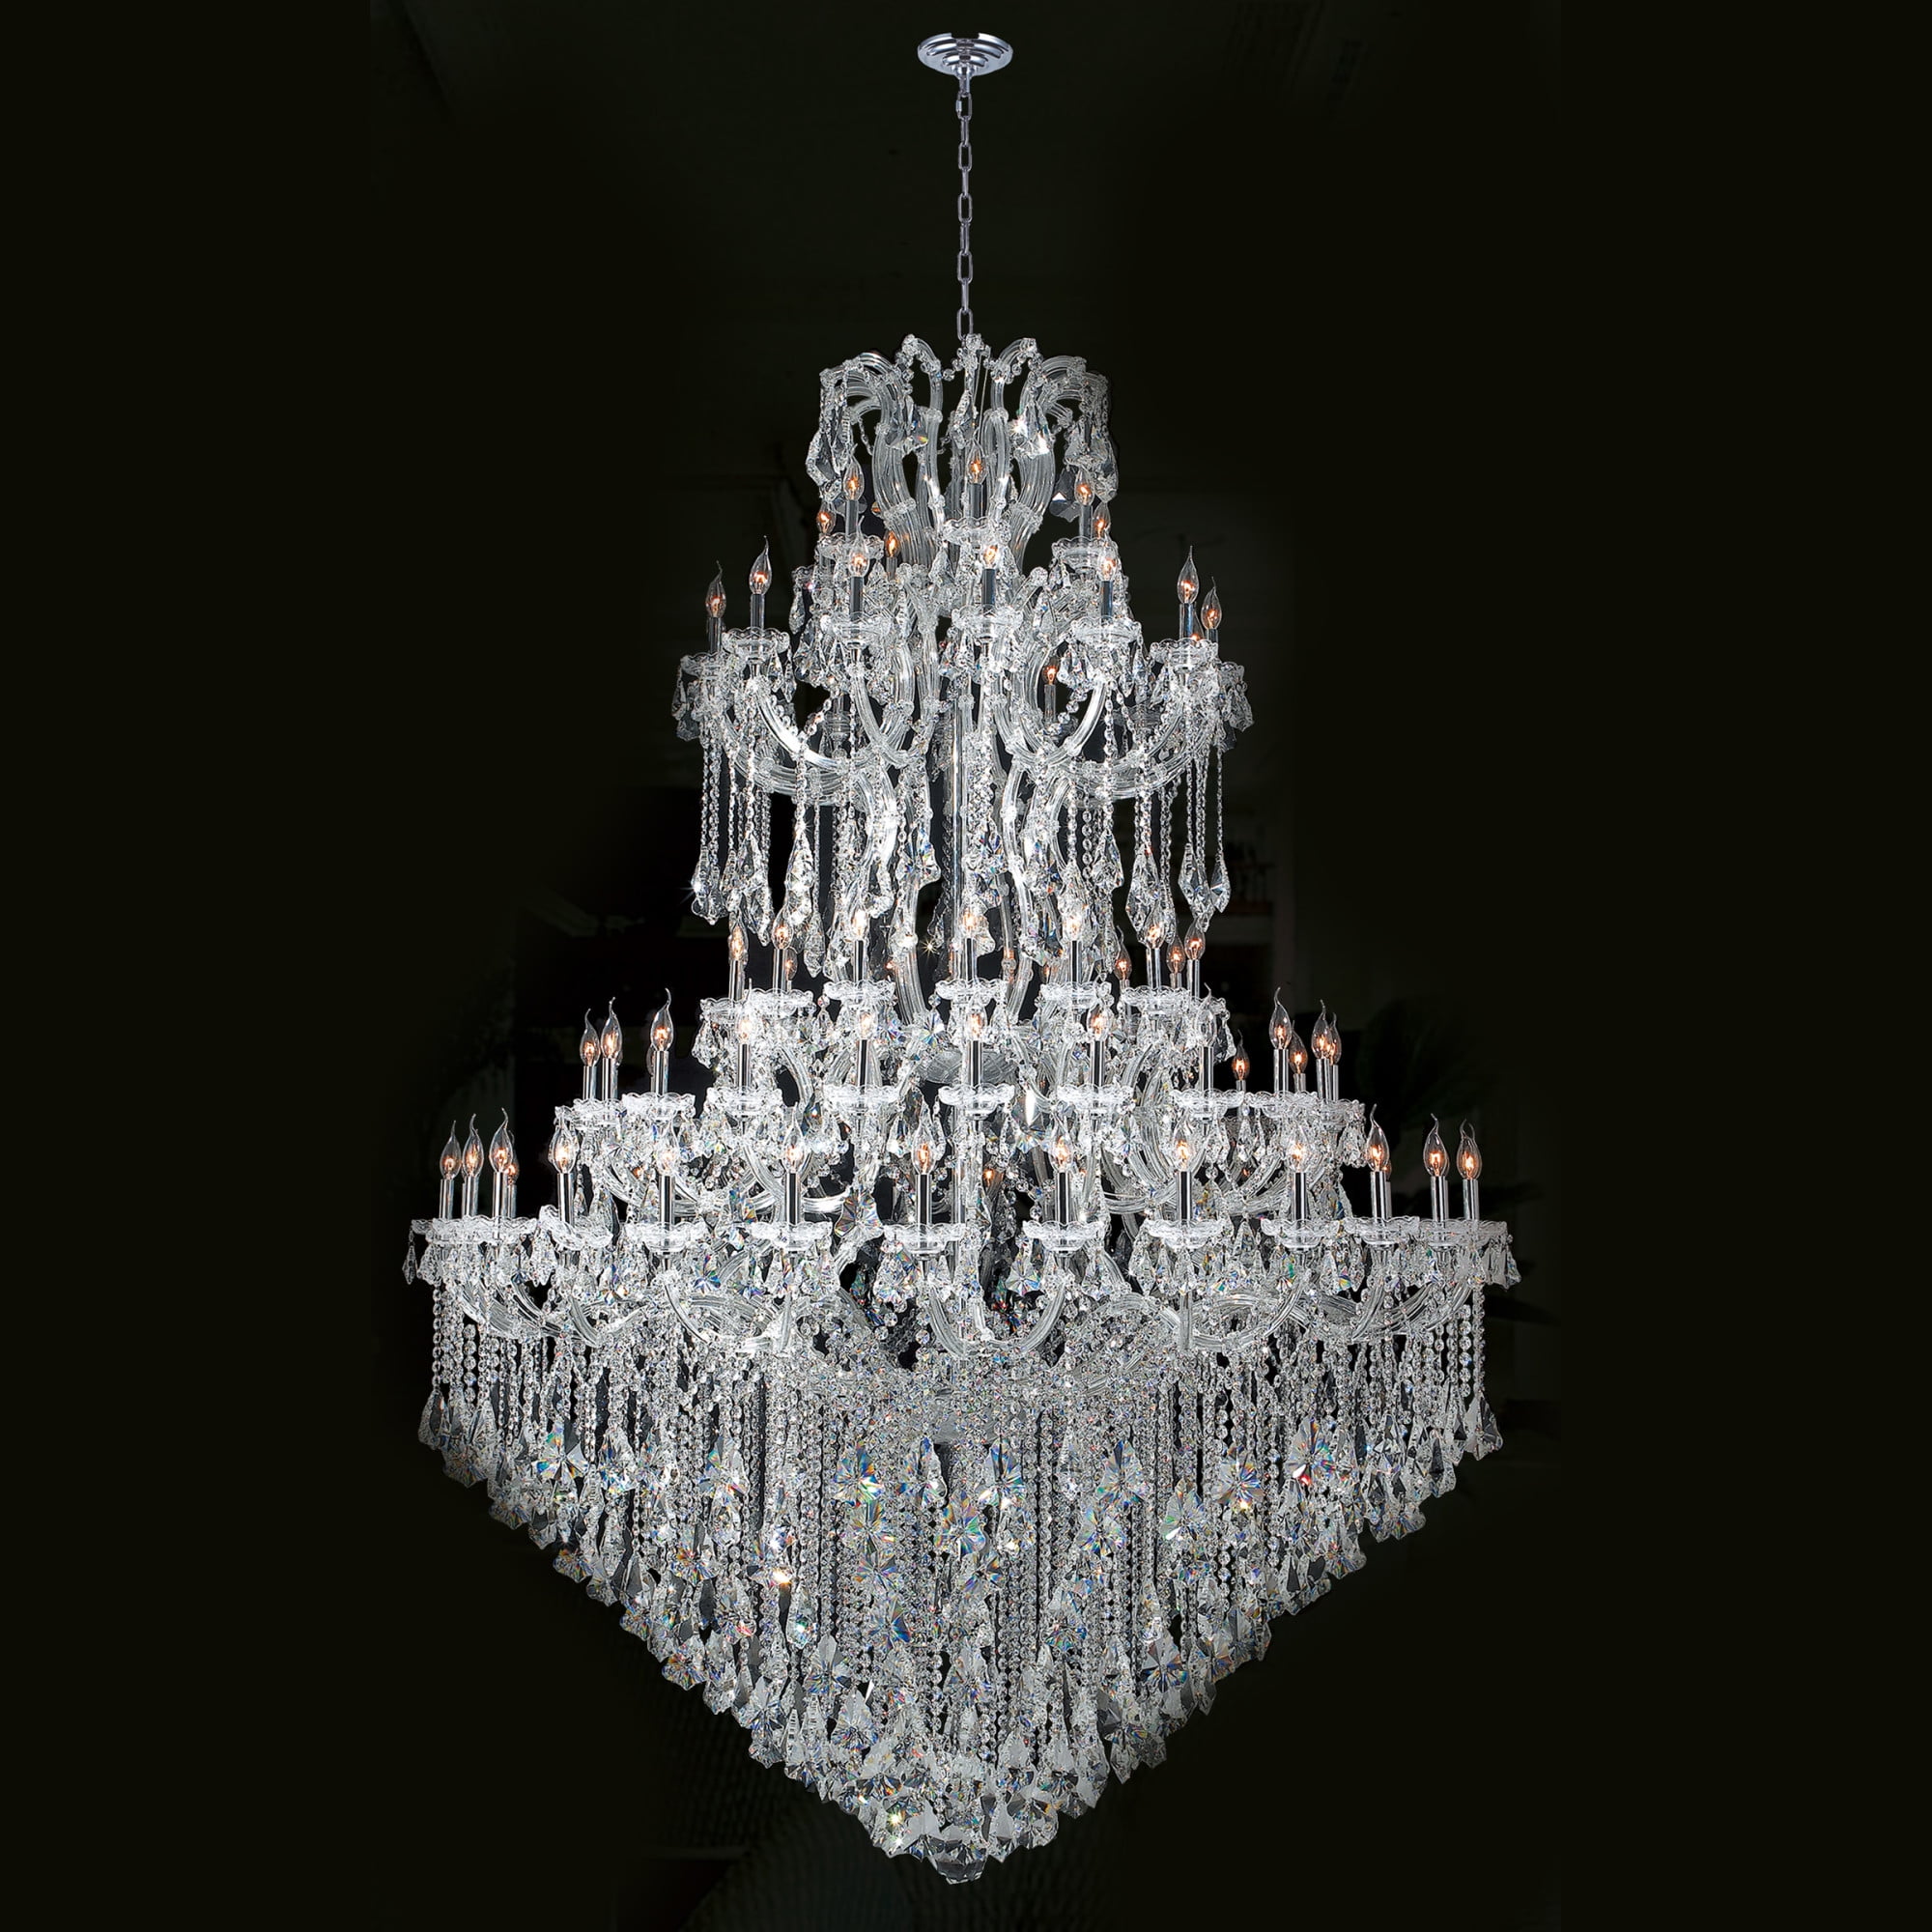 Maria Theresa Collection 84 Light Chrome Finish Crystal Chandelier 72